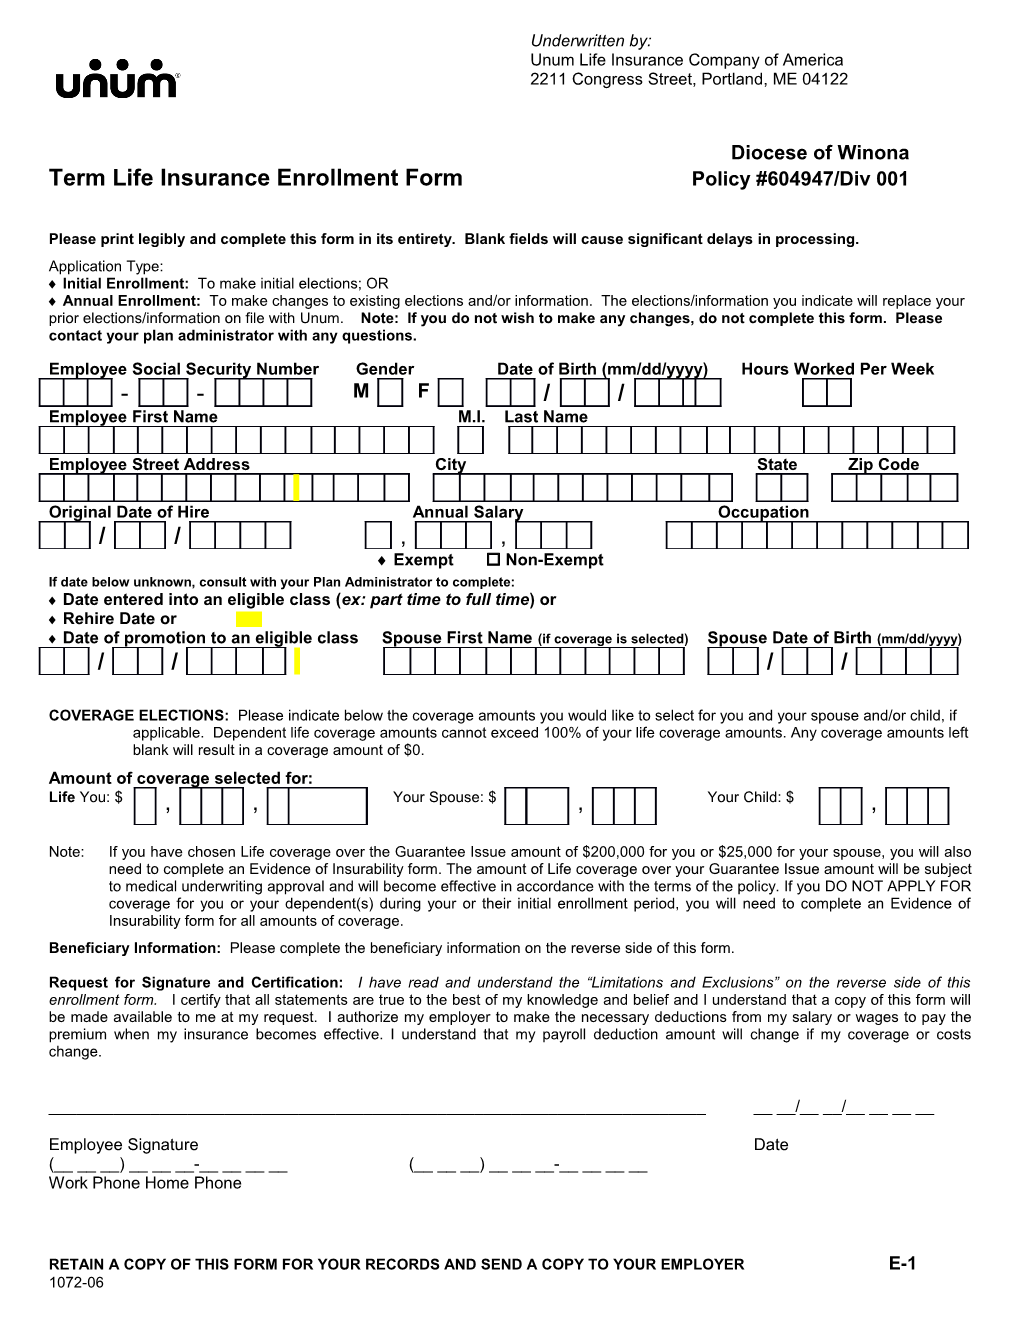 Term Life Insurance Enrollment Form Policy #604947/Div 001